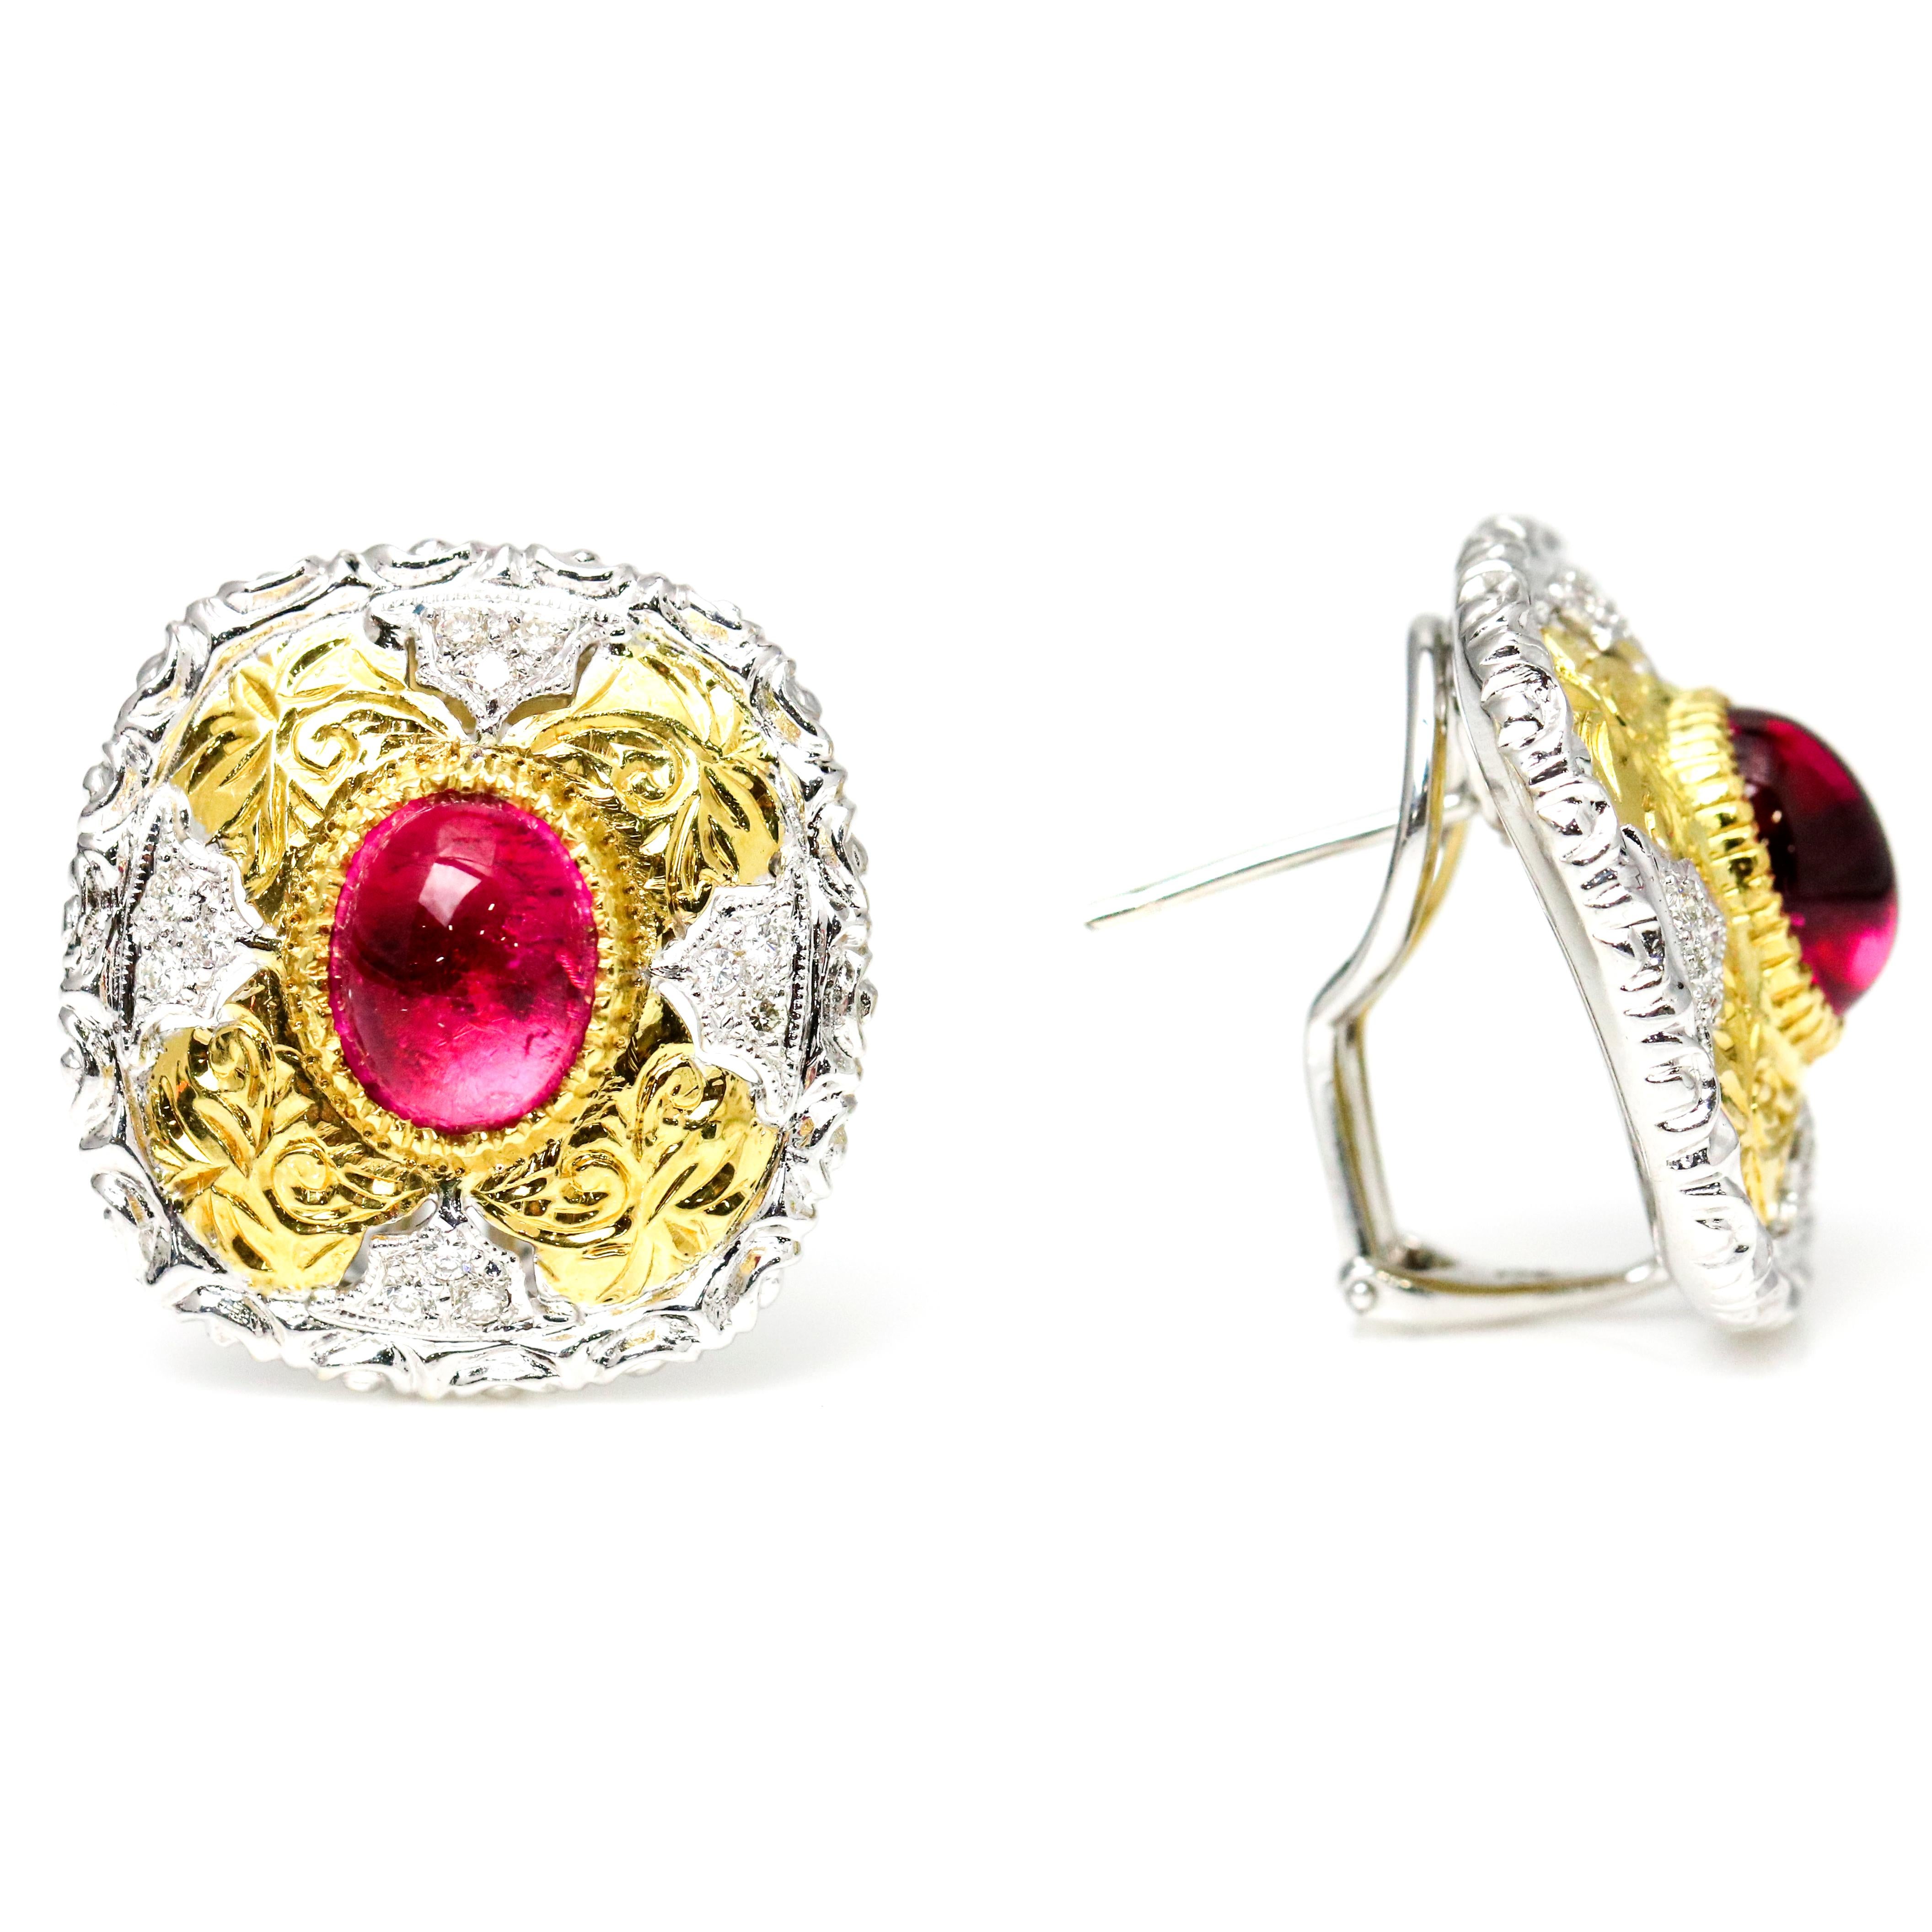 Large square stud earrings crafted in 18 karat white and yellow gold bezel set with a cabochon-cut pink tourmaline and prong set with diamonds. The earrings have intricate gold work throughout that enhances the vibrant pink tourmaline gemstone at